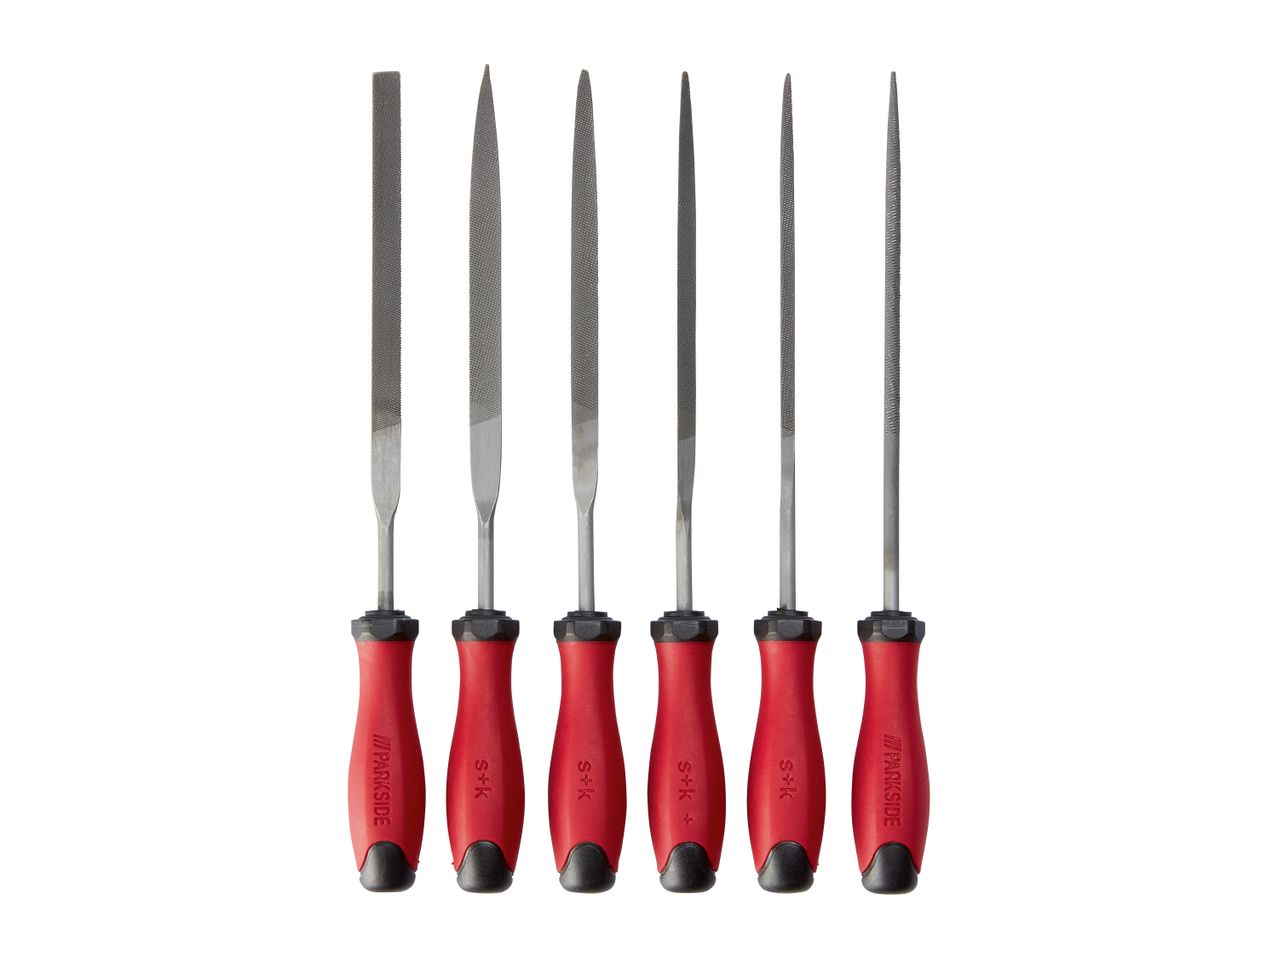 Go to full screen view: PARKSIDE Needle File Set - 6-piece set - Image 1